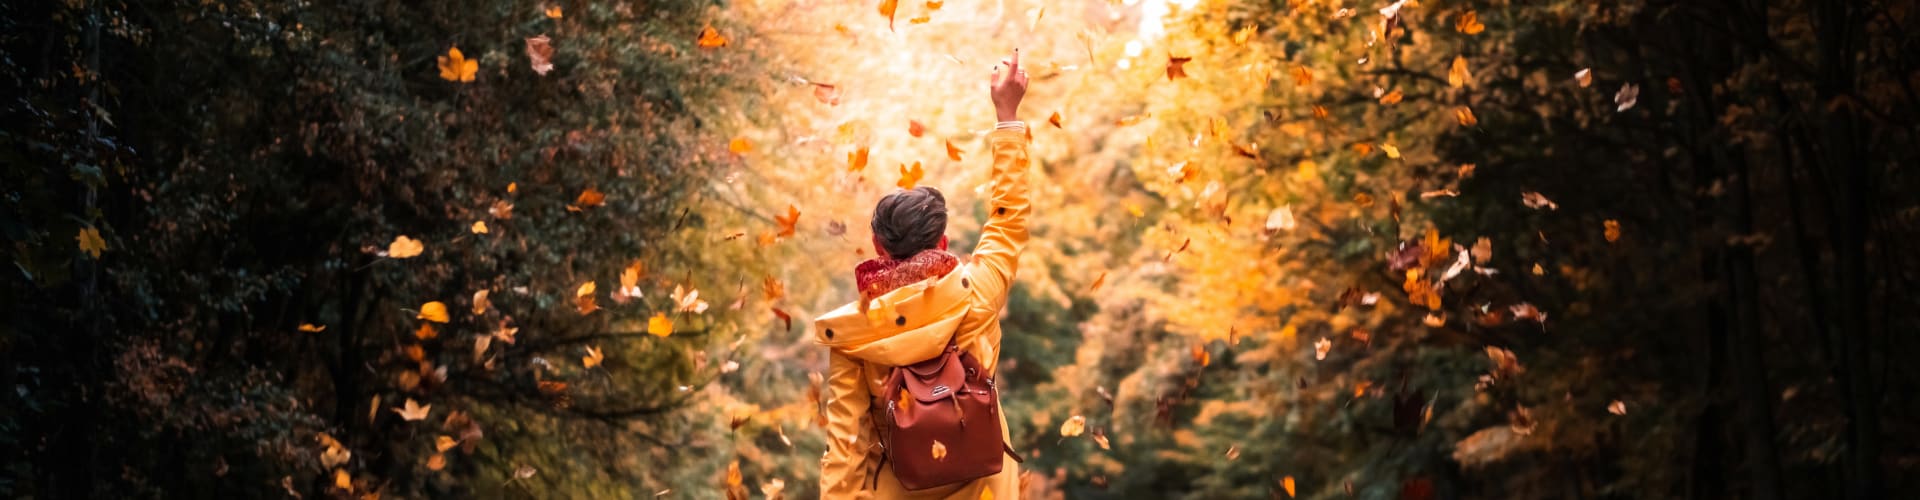 Fall is the Season to Work on Your Mental Health—Here are 10 Tips to Get You Started!